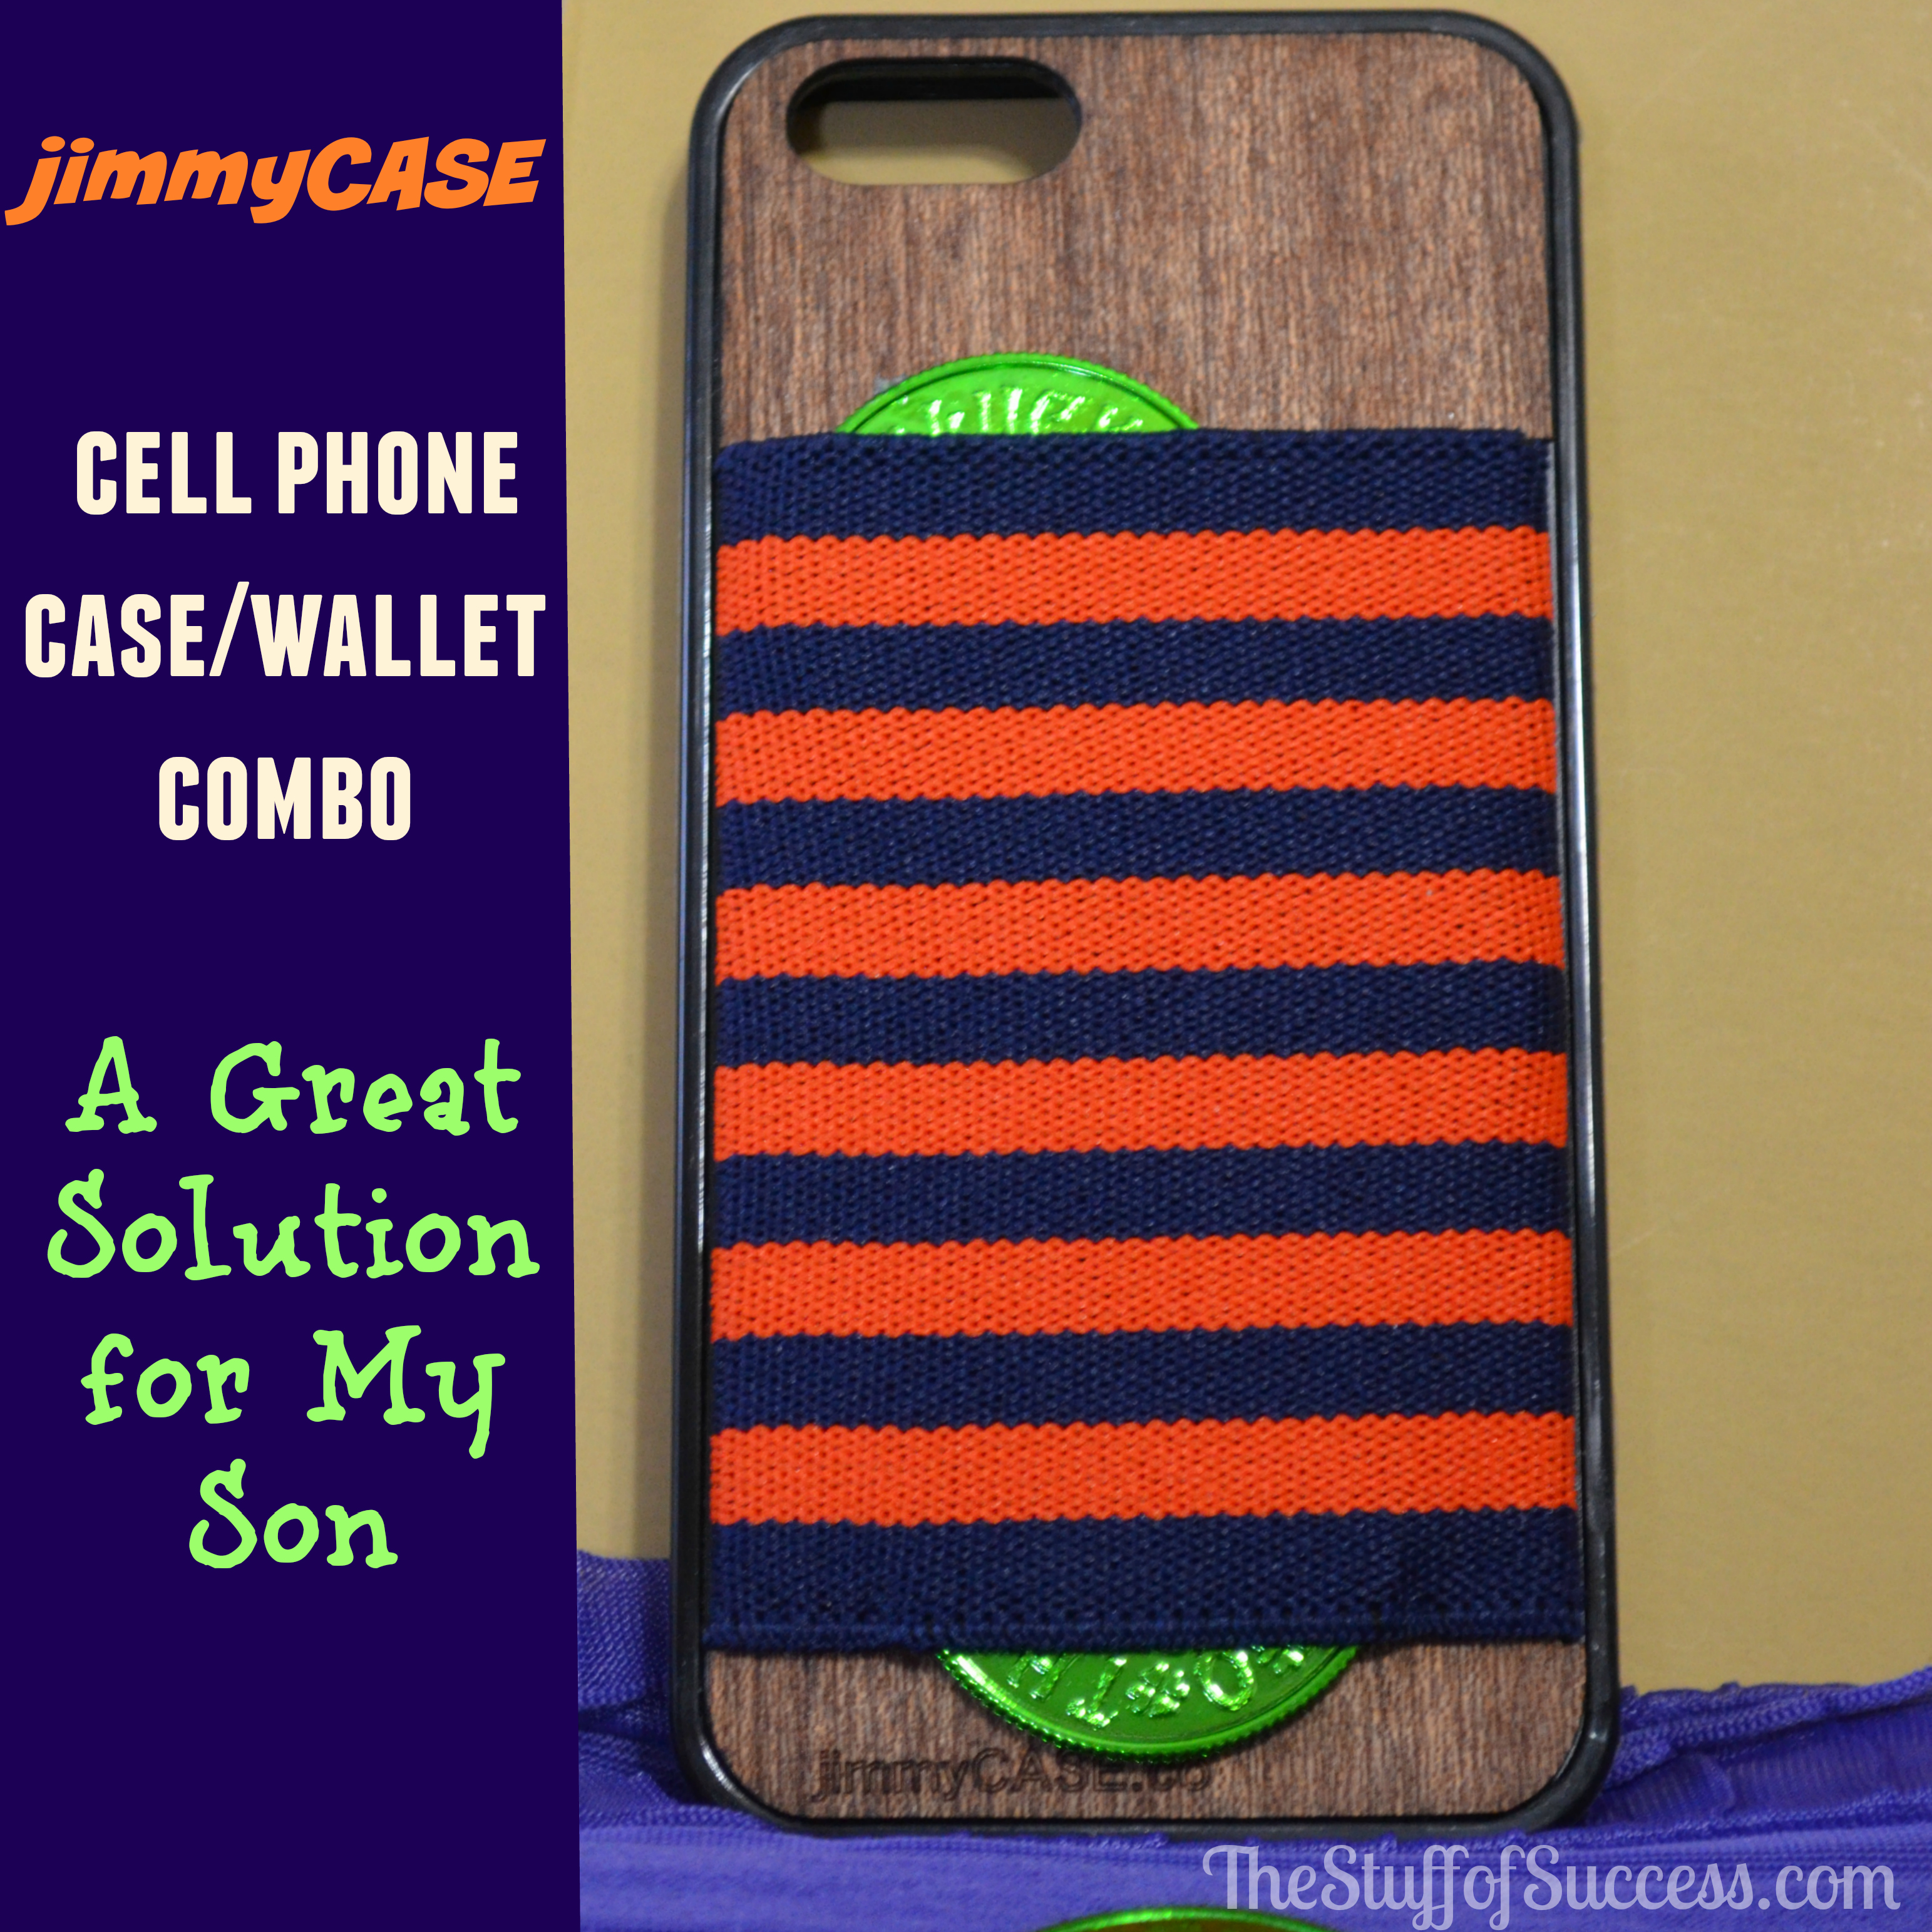 jimmyCASE cell phone case/wallet combo - A Great Solution for My Son!